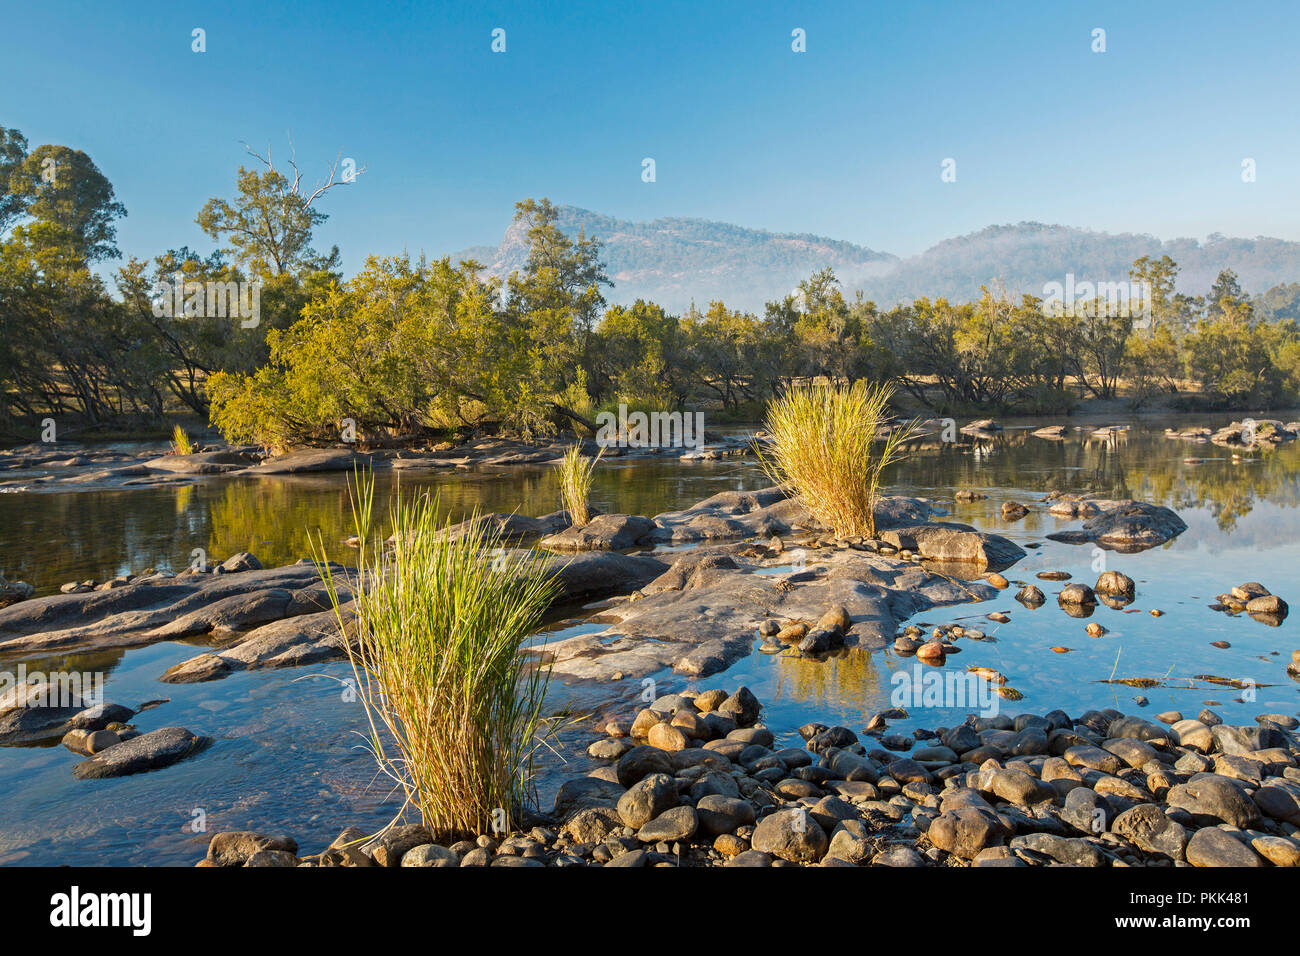 Stunning Australian landscape with rock strewn blue waters of Mann River hemmed by forests at foot of ranges under blue sky of early morning in NSW Stock Photo